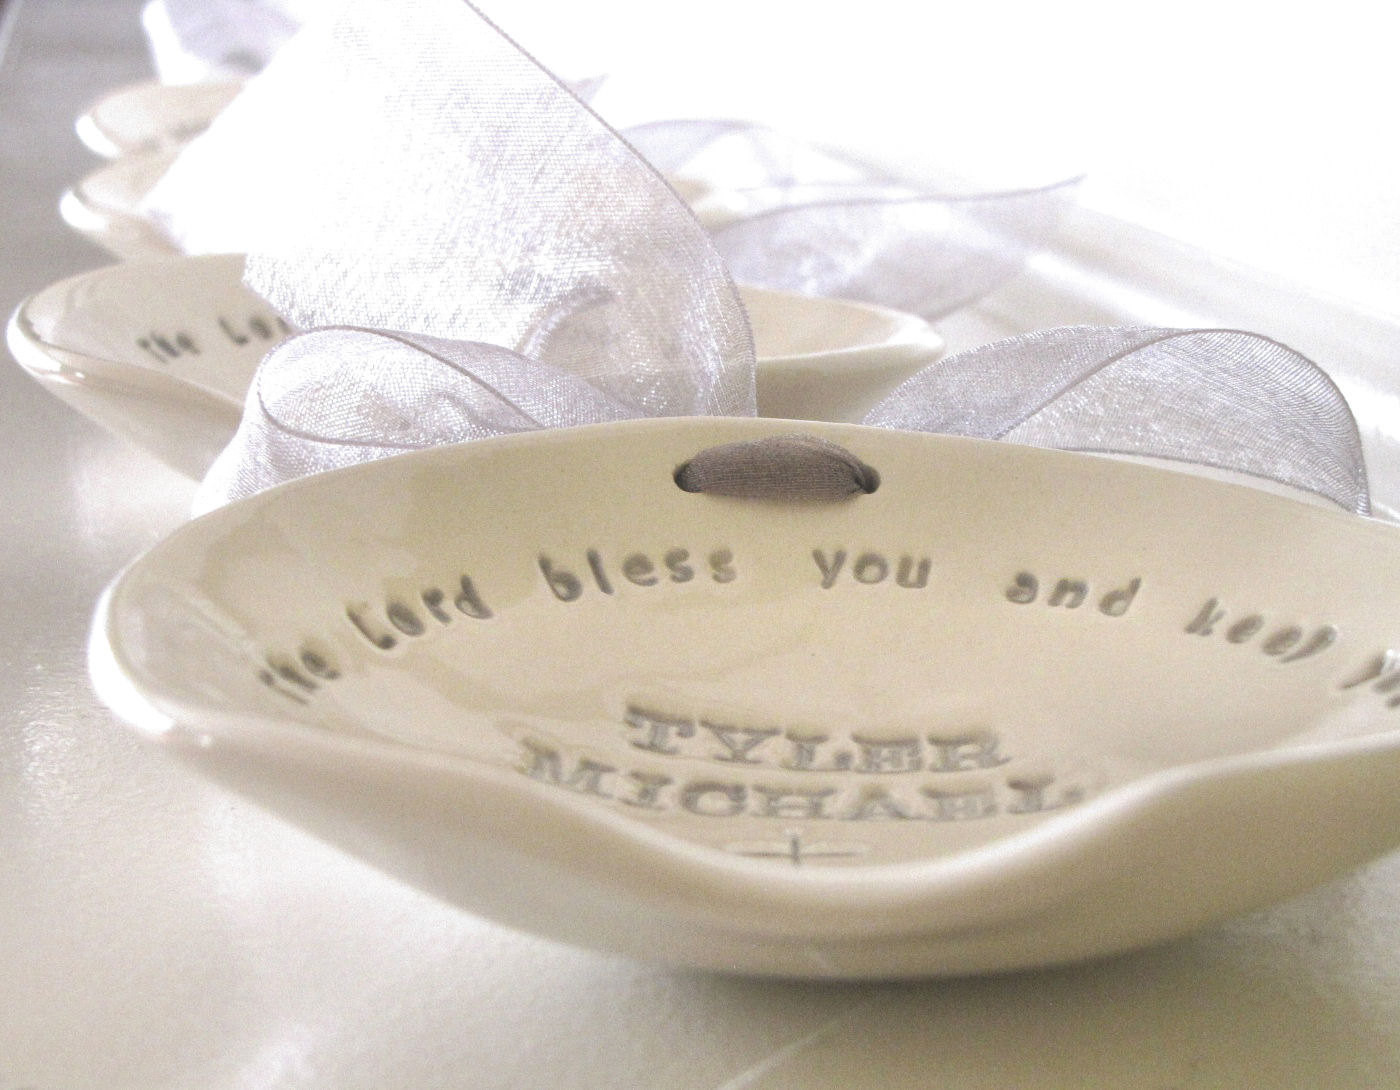 Baby Boy Christening Gift
 Which Baptism Gifts For Boys Are Appropriate